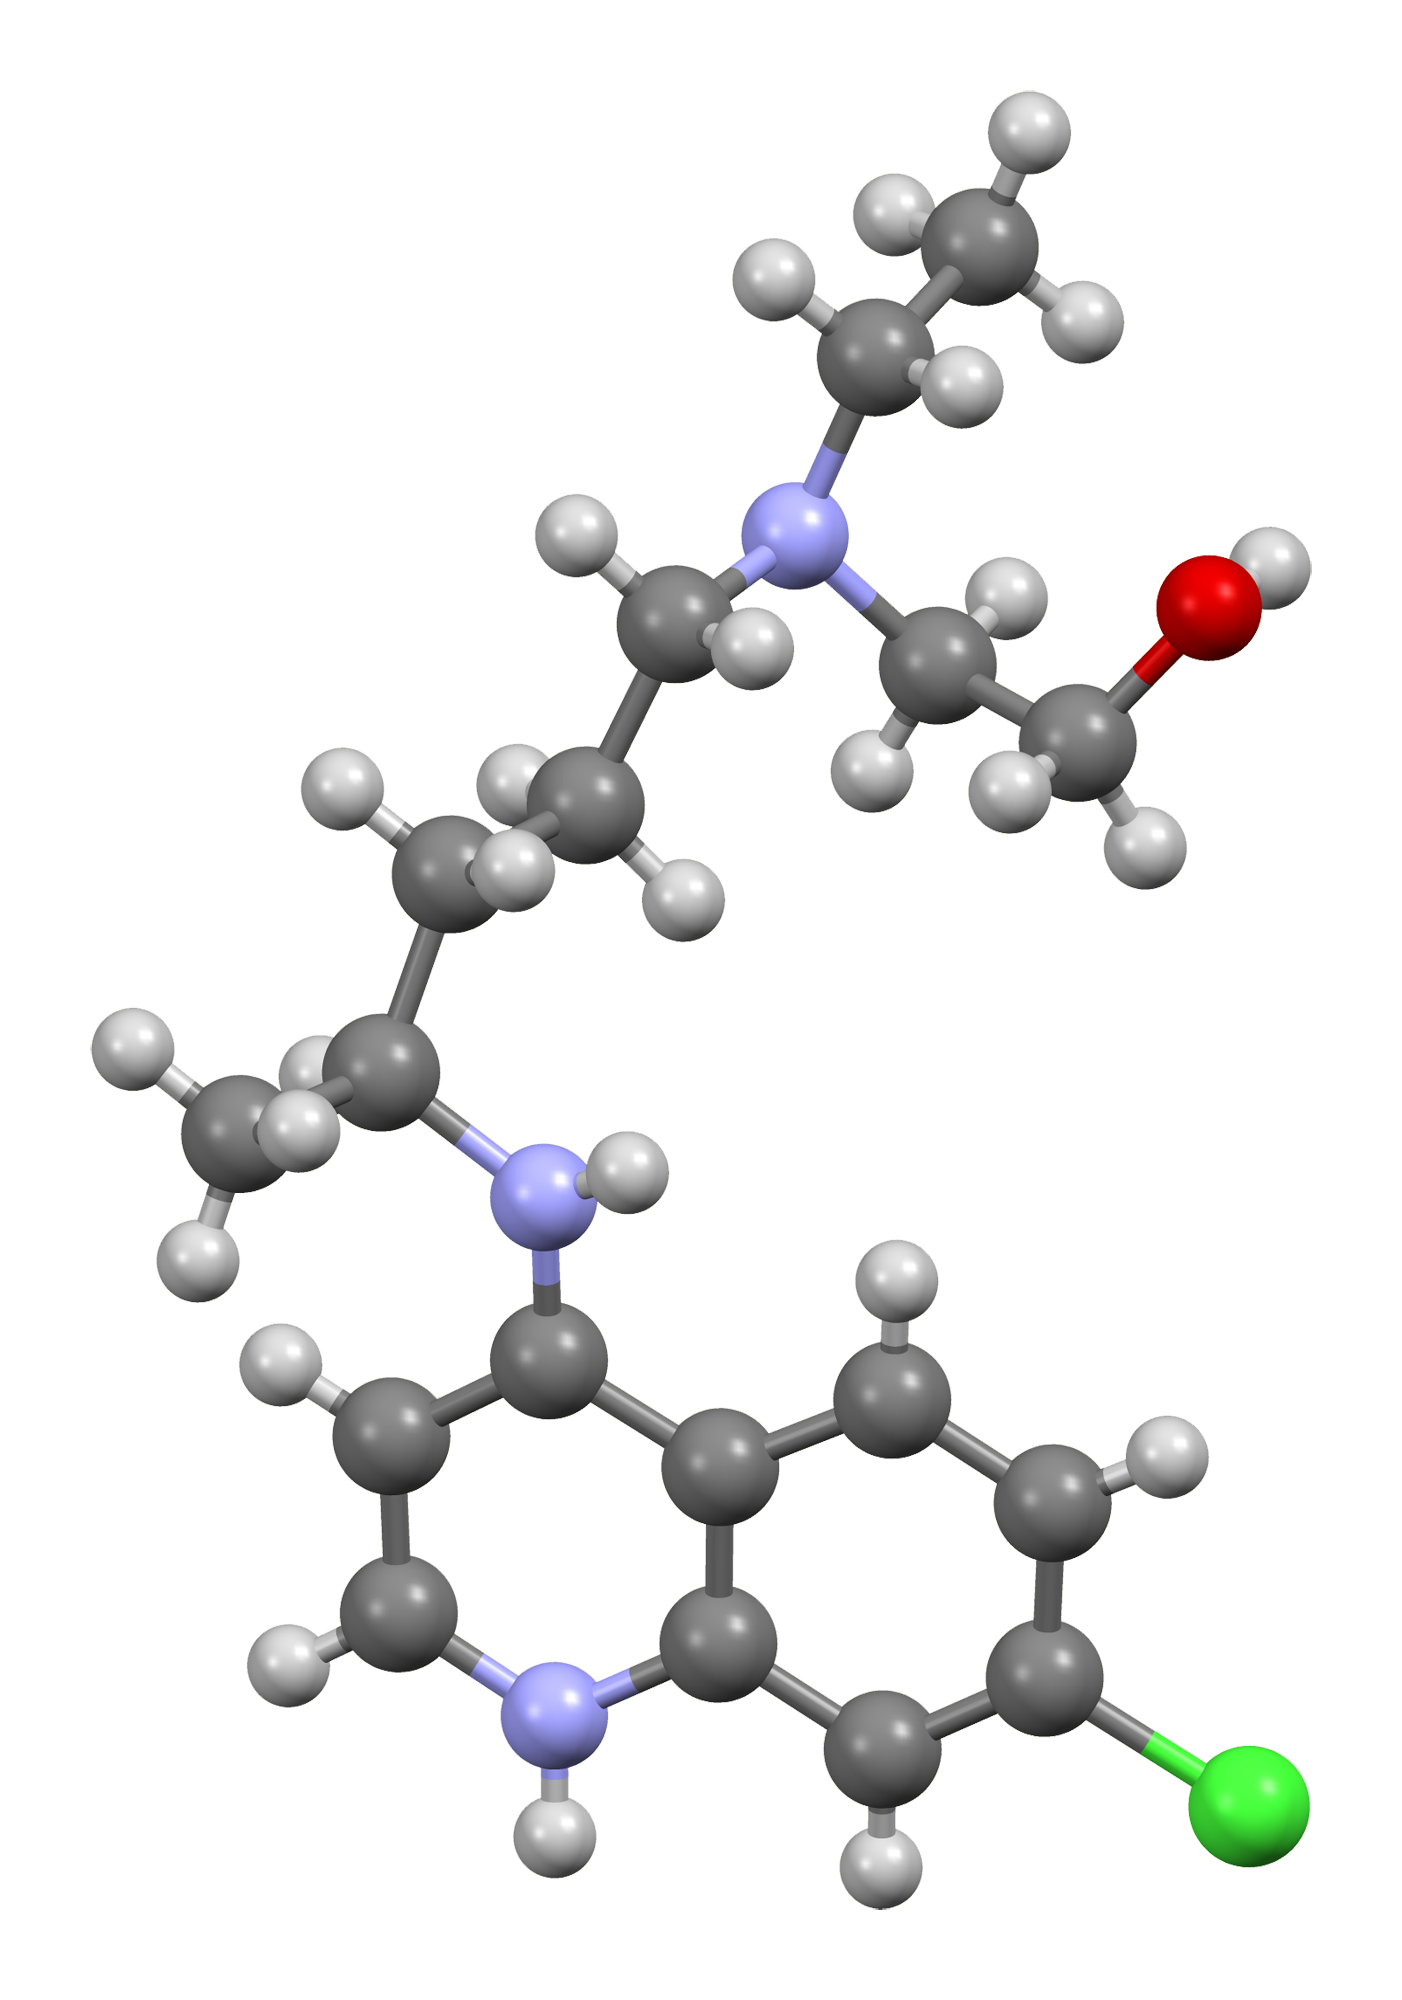 https://upload.wikimedia.org/wikipedia/commons/a/a7/Hydroxychloroquine-based-on-xtal-Mercury-3D-balls.png